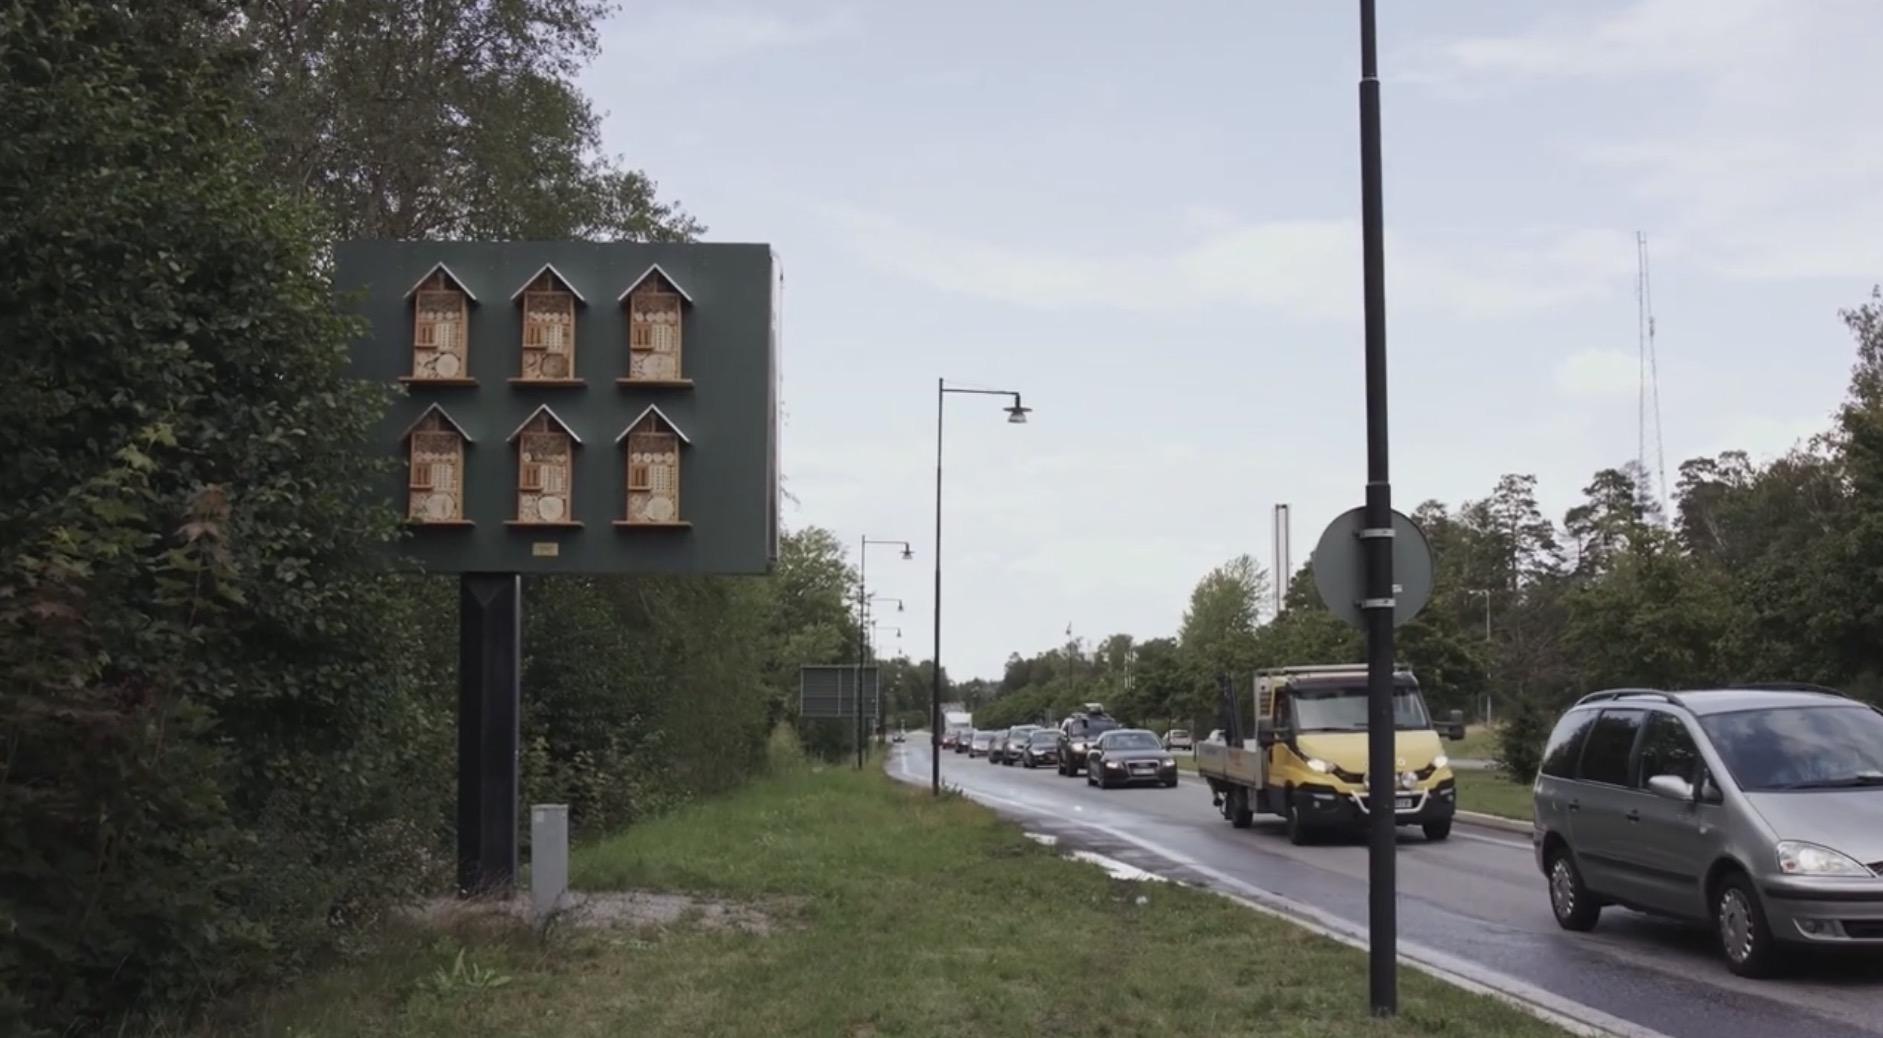 The campaign, launched in conjunction with outdoor-advertising giant JC Decaux, debuted this month on the reverse of a north-facing billboard in Jarfalla, about 20 minutes from downtown Stockholm. (Apparently bees prefer hives that face south or southeast.)